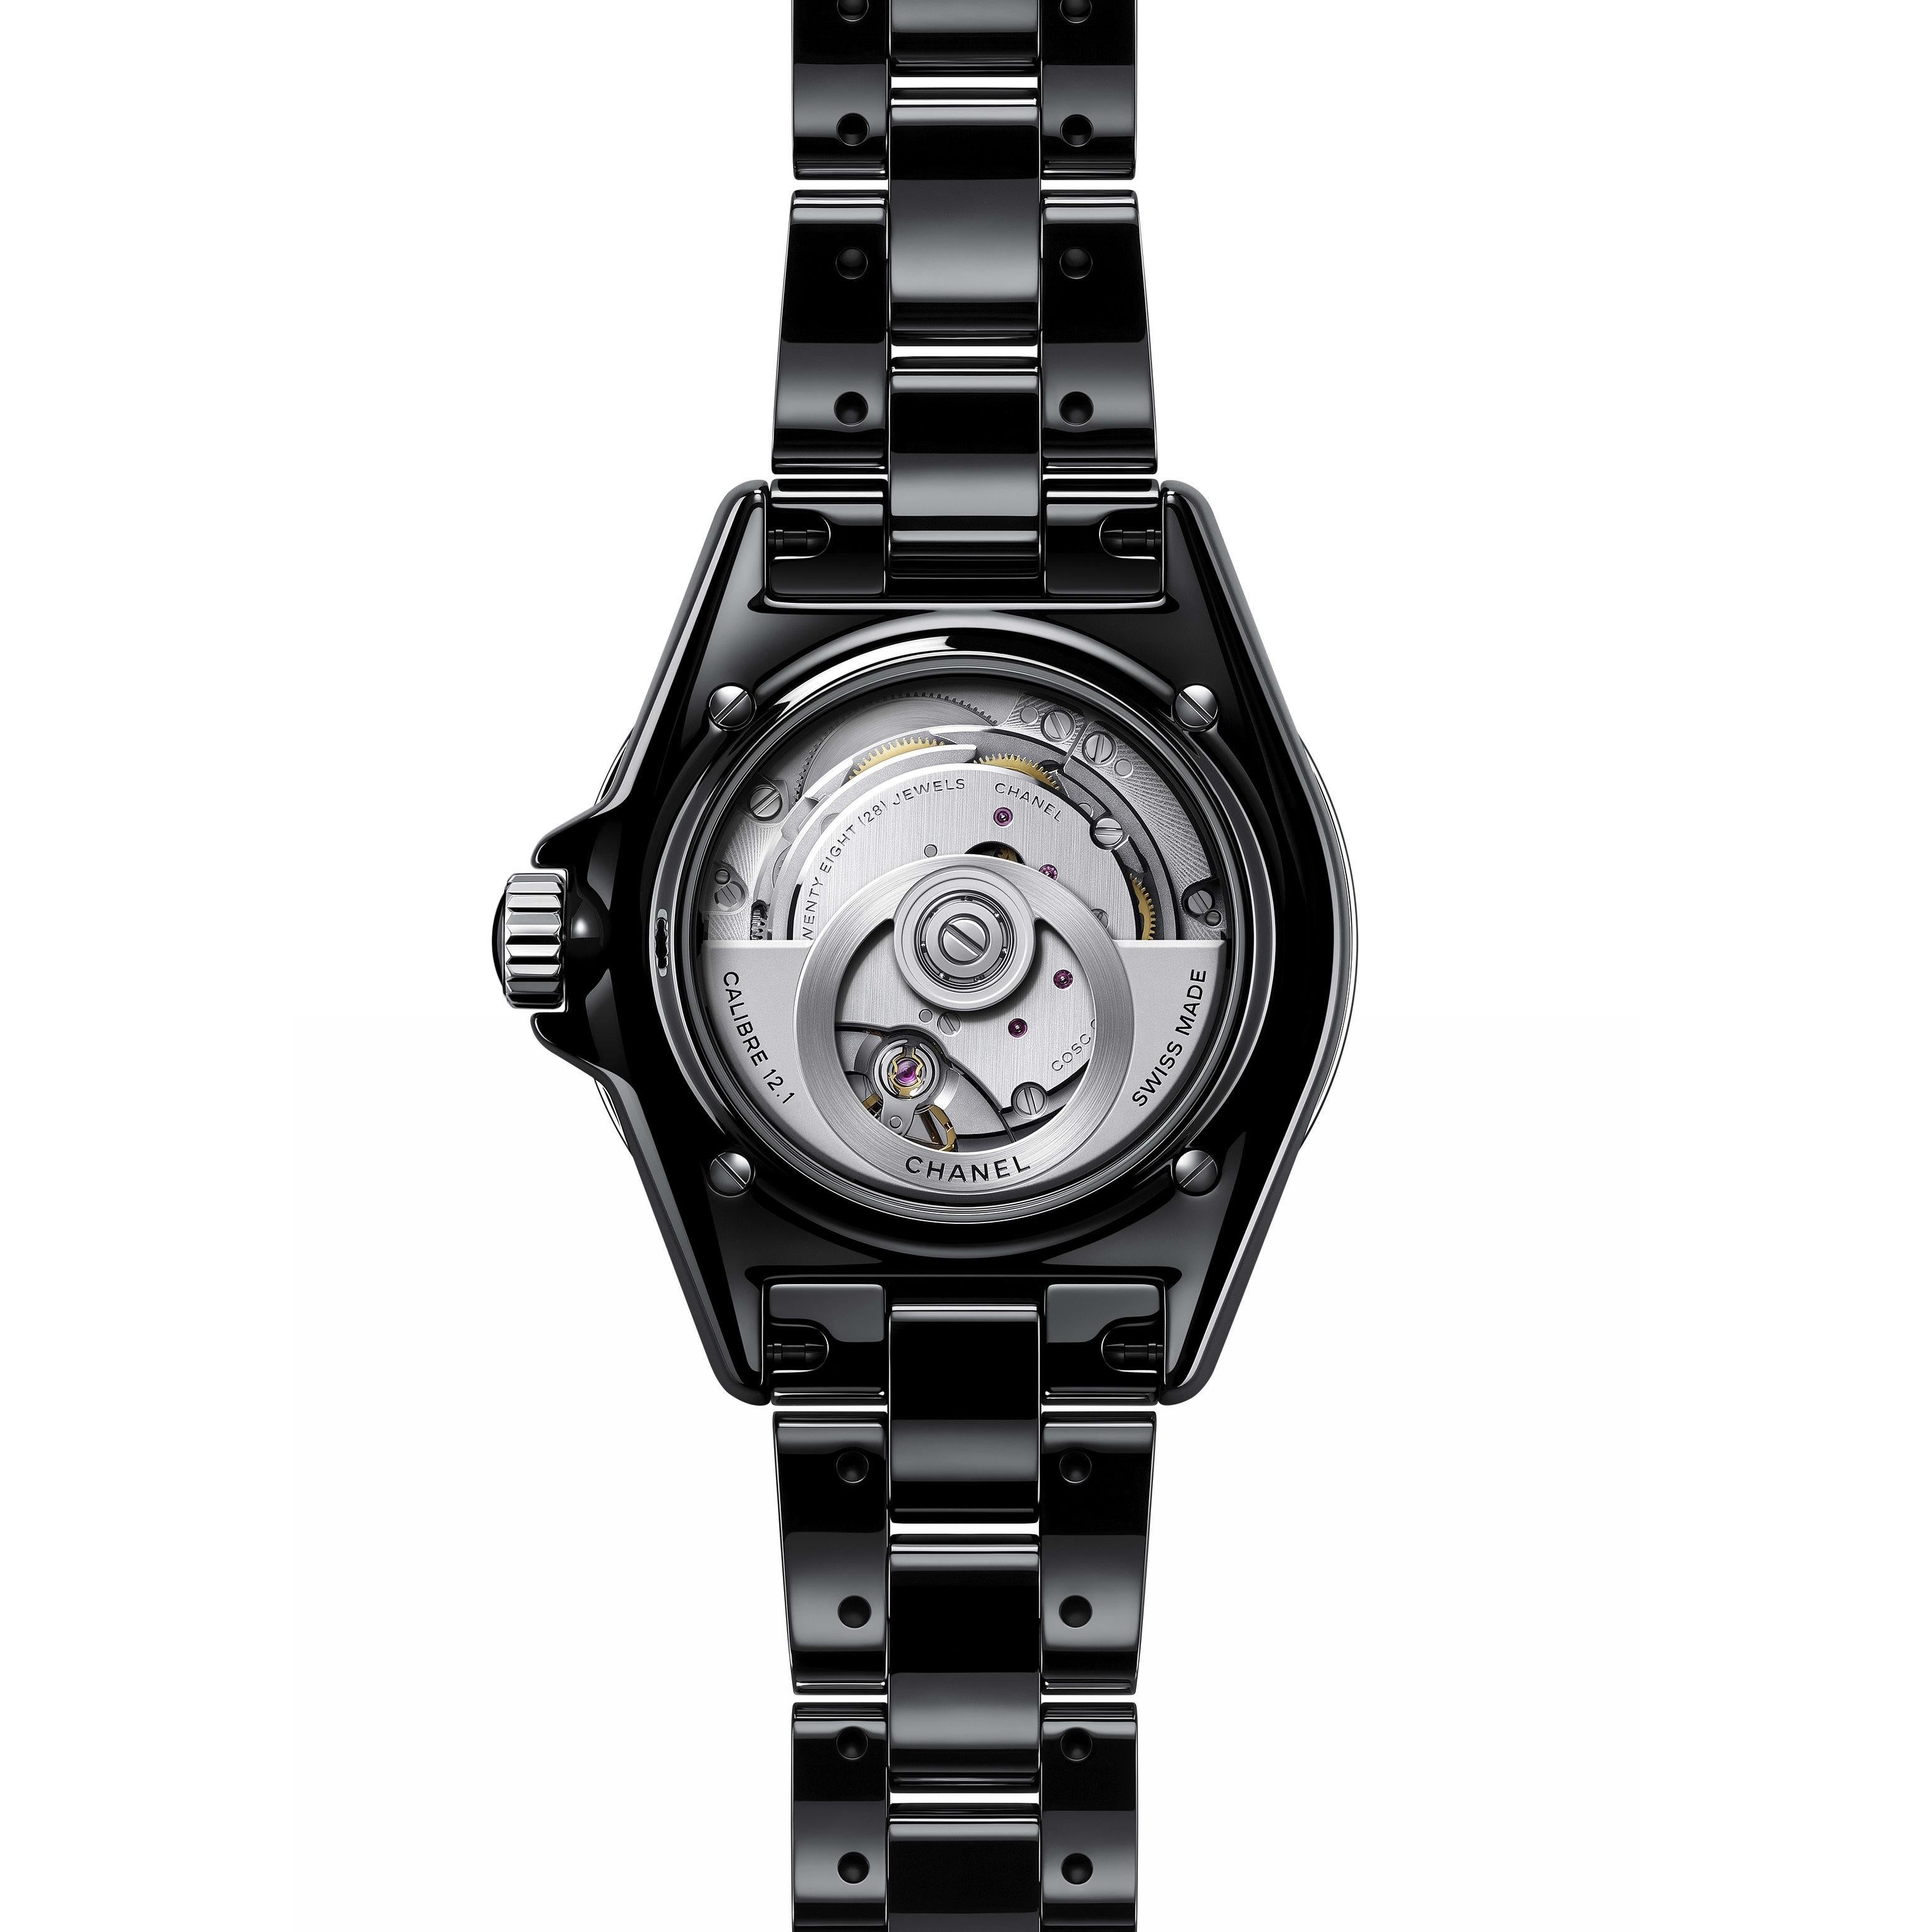 Black (highly resistant) ceramic case and bracelet. Uni-directional rotating black (highly resistant) ceramic bezel with a steel rim. Black dial with silver-tone hands and diamond hour markers. Minute markers around the outer rim. Dial Type: Analog.